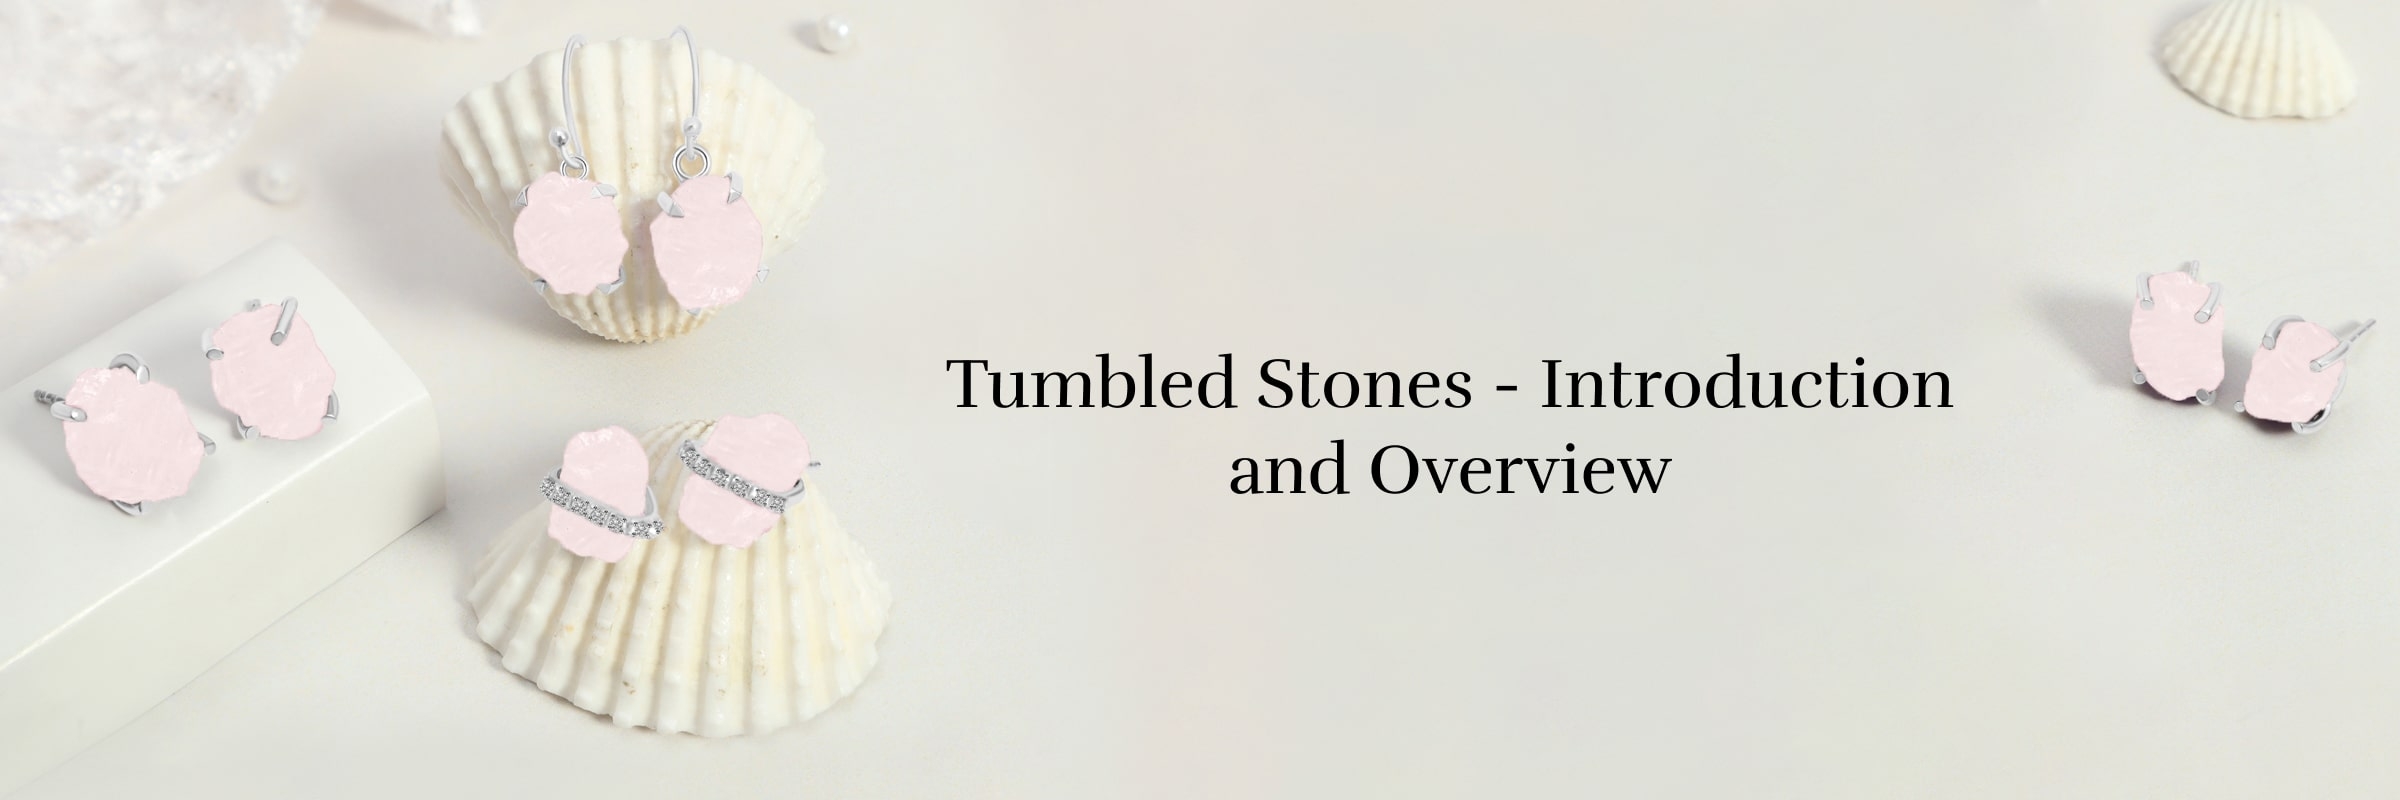 What are Tumbled Stones